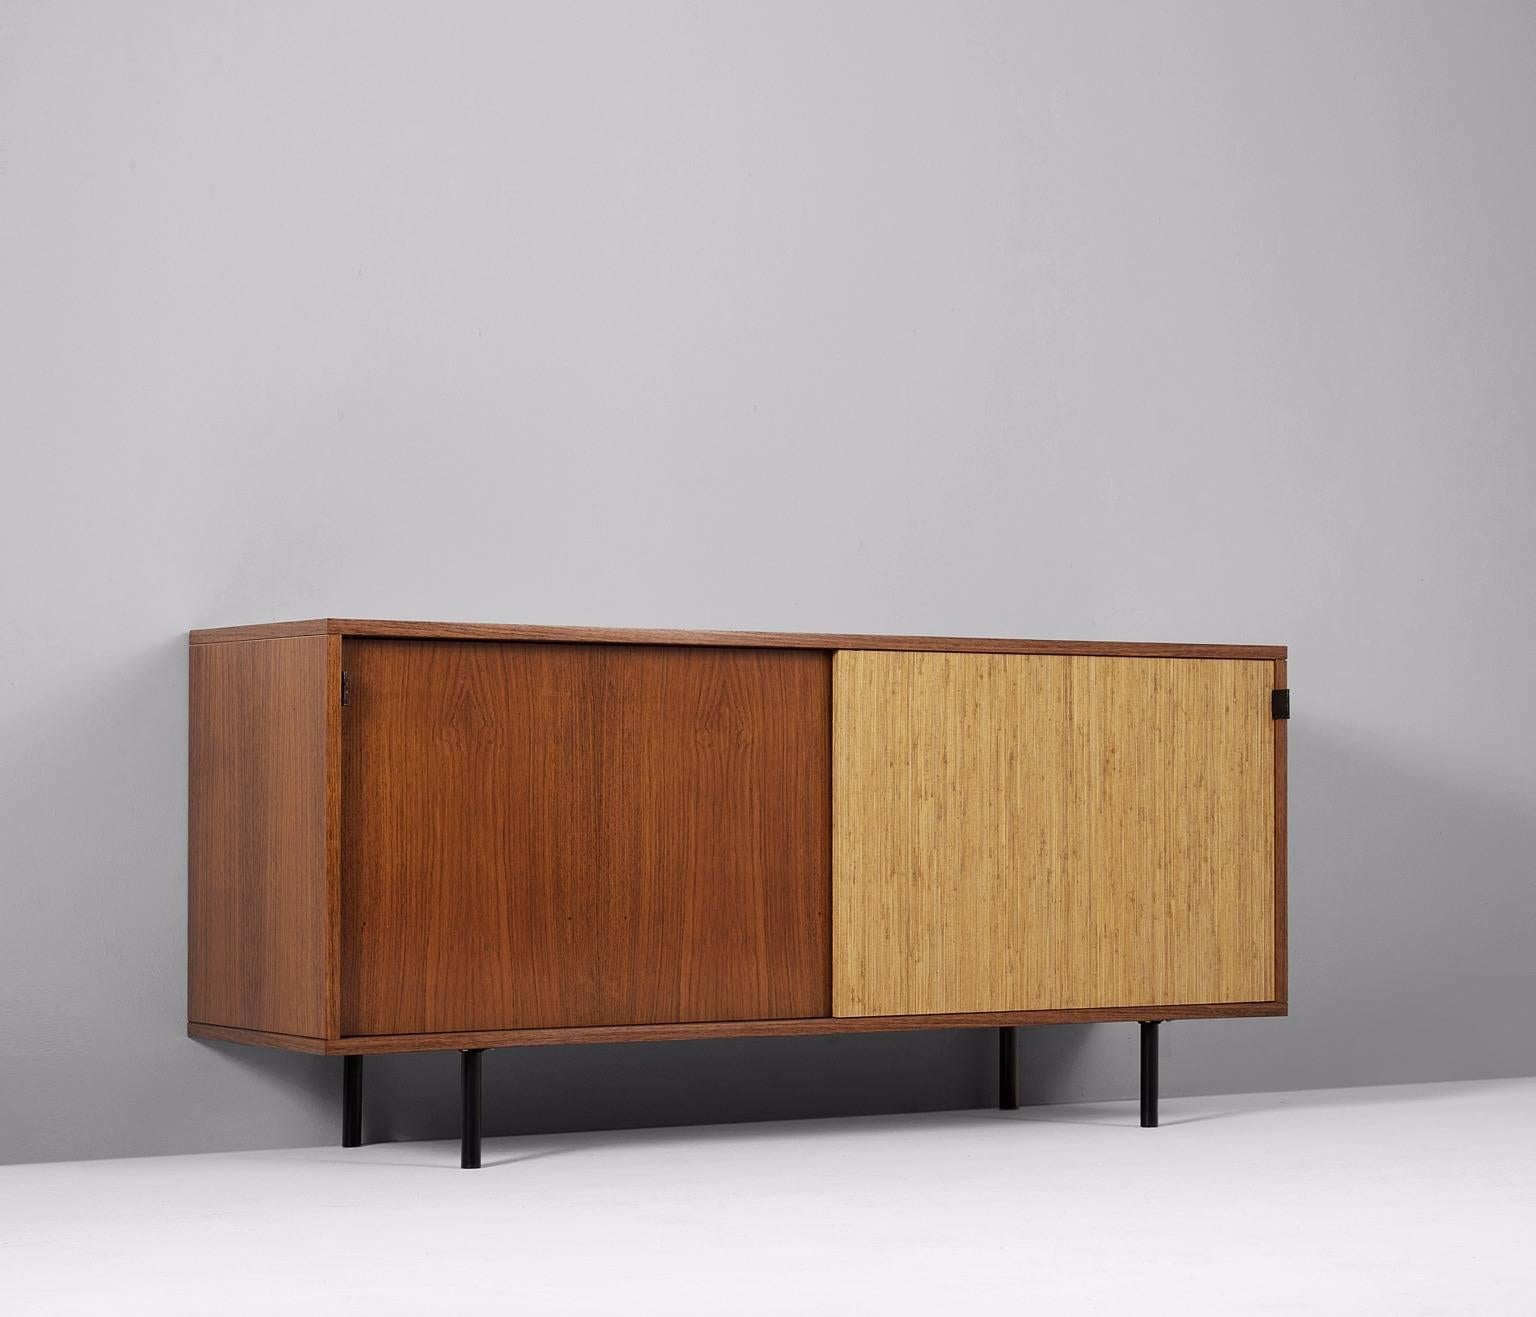 Sideboard model 116 in rosewood, raffia, steel and leather, by Florence Knoll, United States 1948. 

An early office-residential crossover piece. The credenza has two sliding doors, one covered with seagrass. Inside there are several shelves.